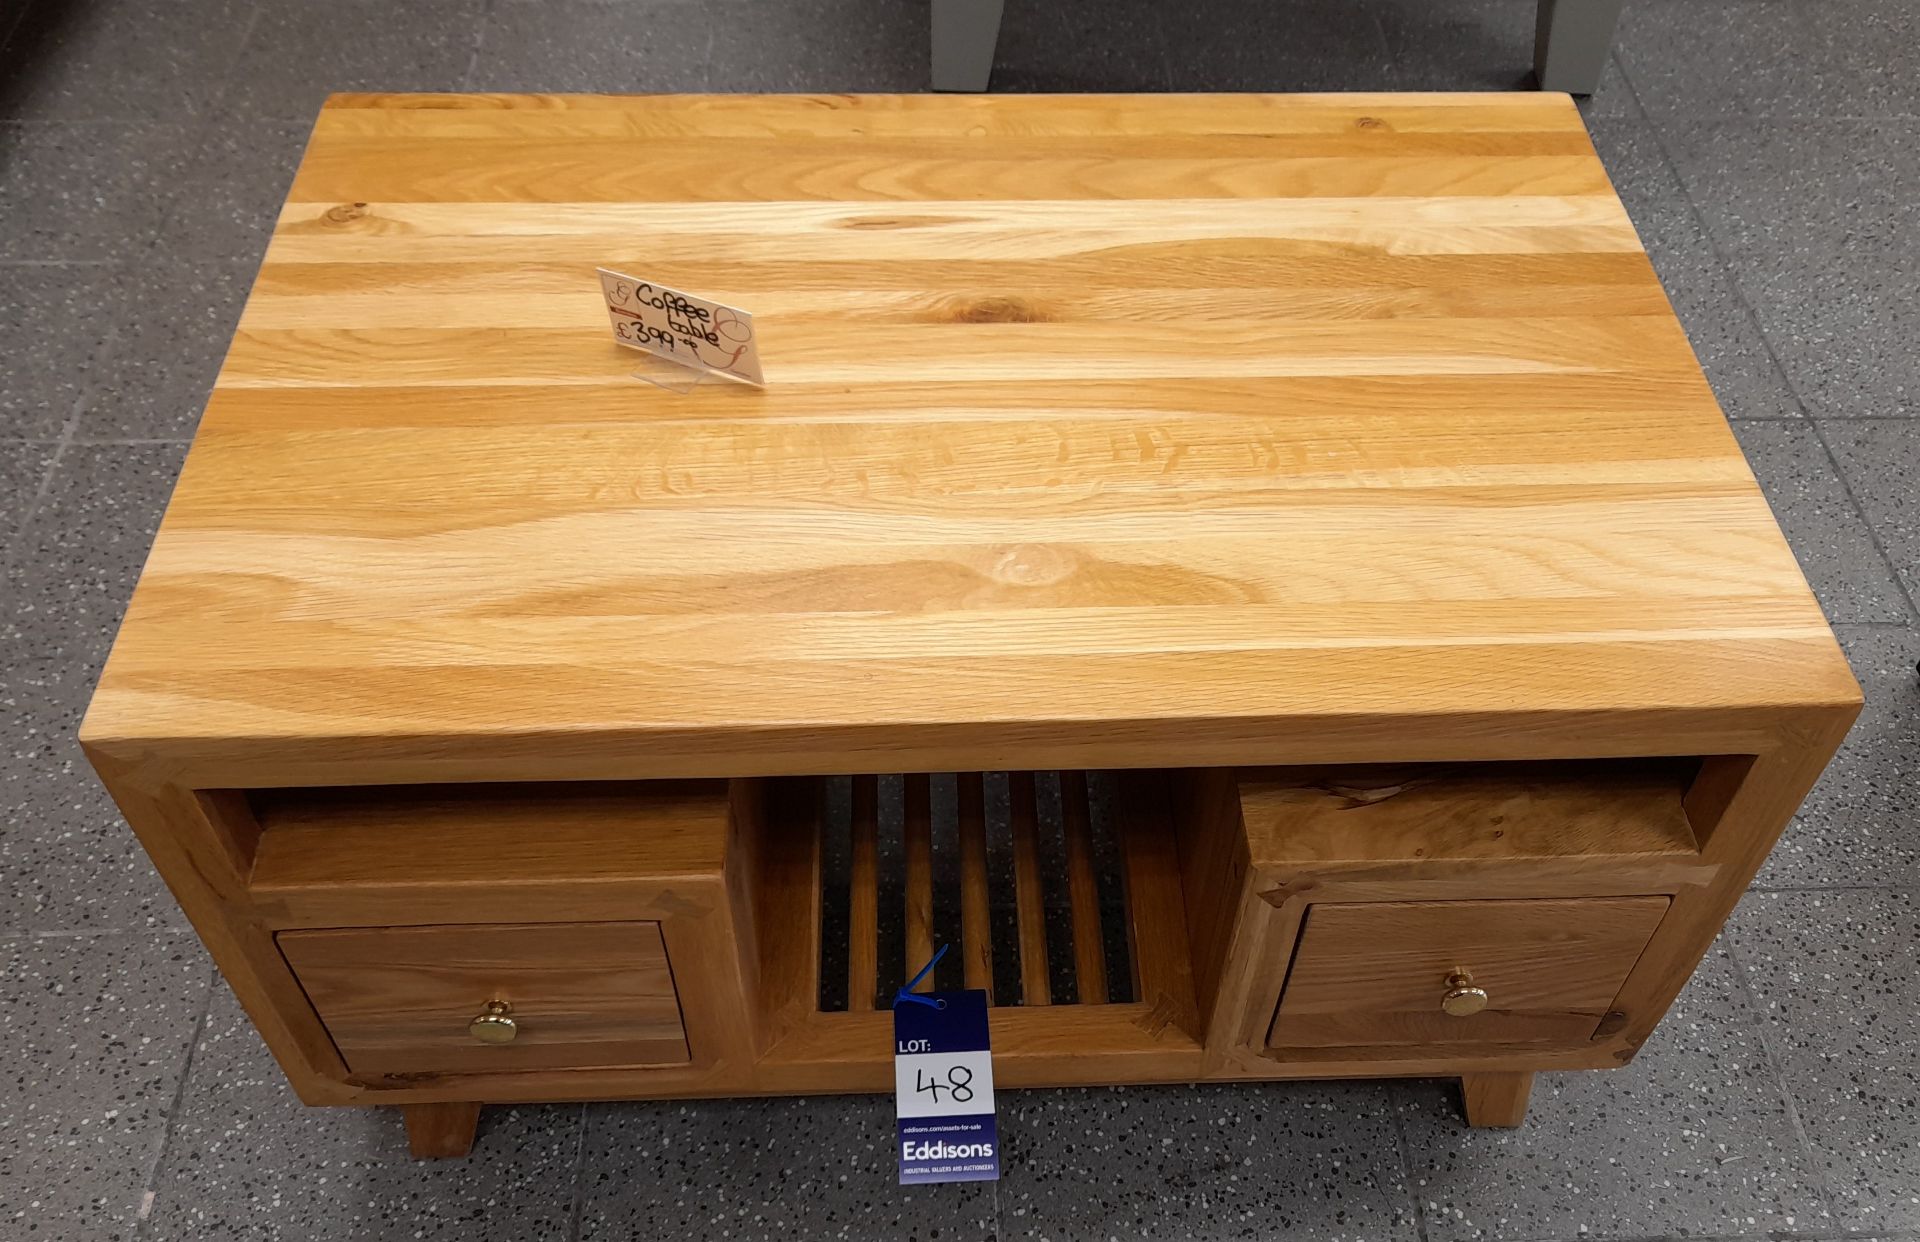 Wooden designer coffee table with double sided drawer Approx. 900mm (w) x 600mm (d) x 500mm (h)